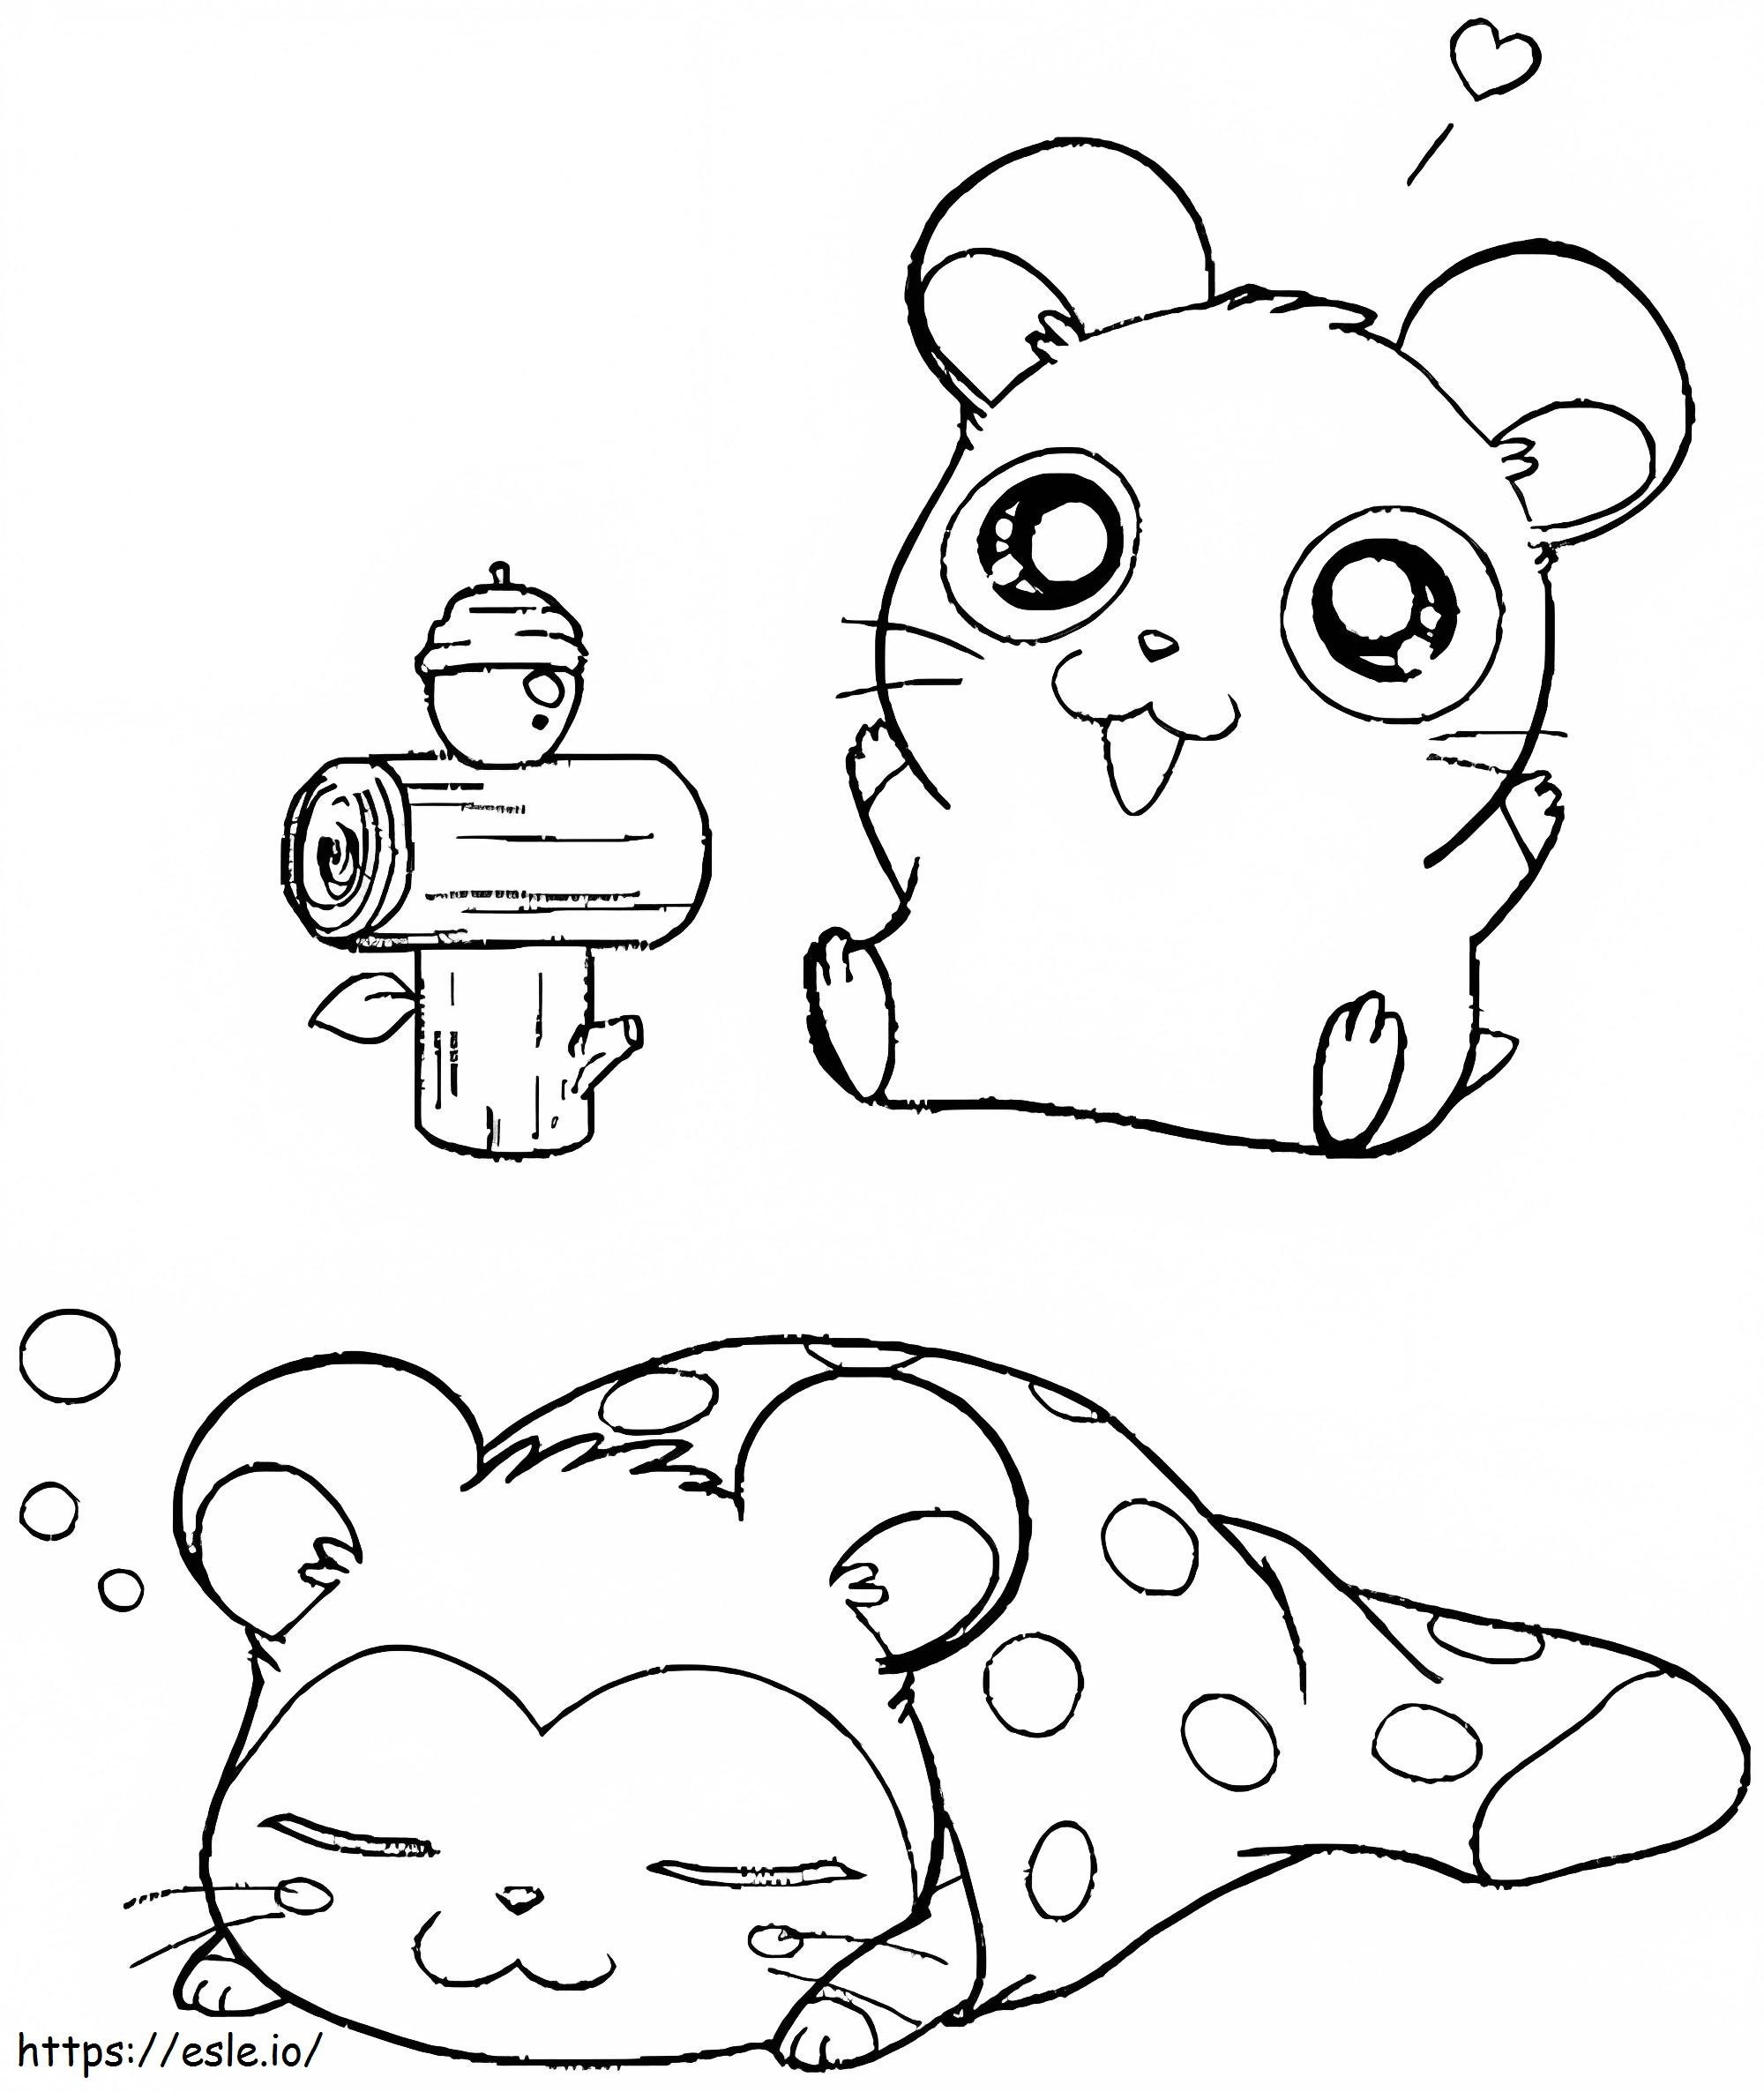 Sleeping Hamster coloring page